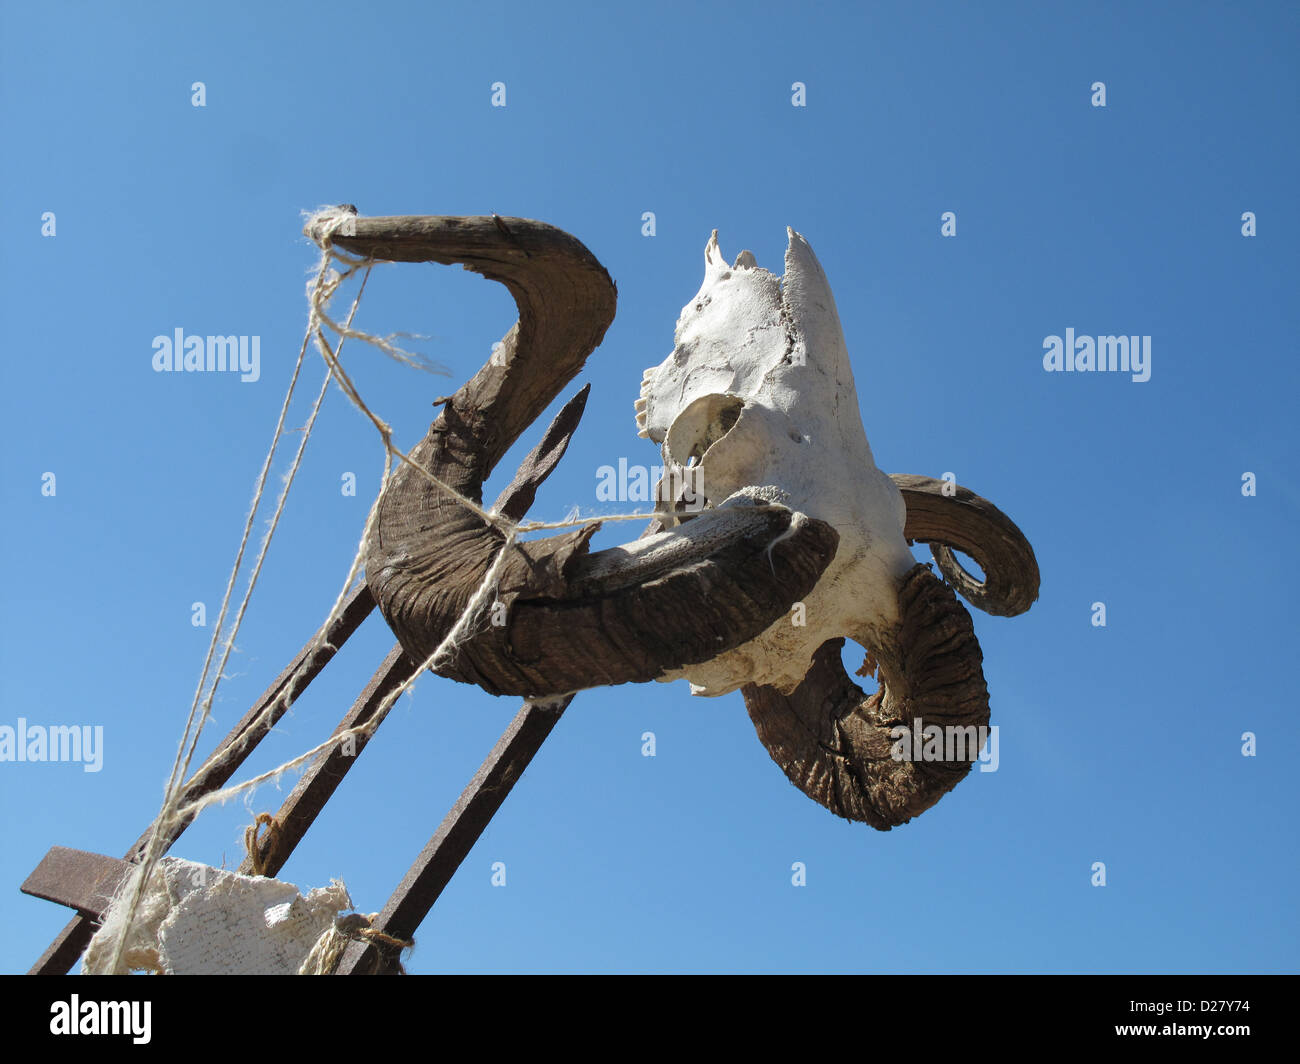 Impaled ram's skull on metal spike with blue sky Stock Photo